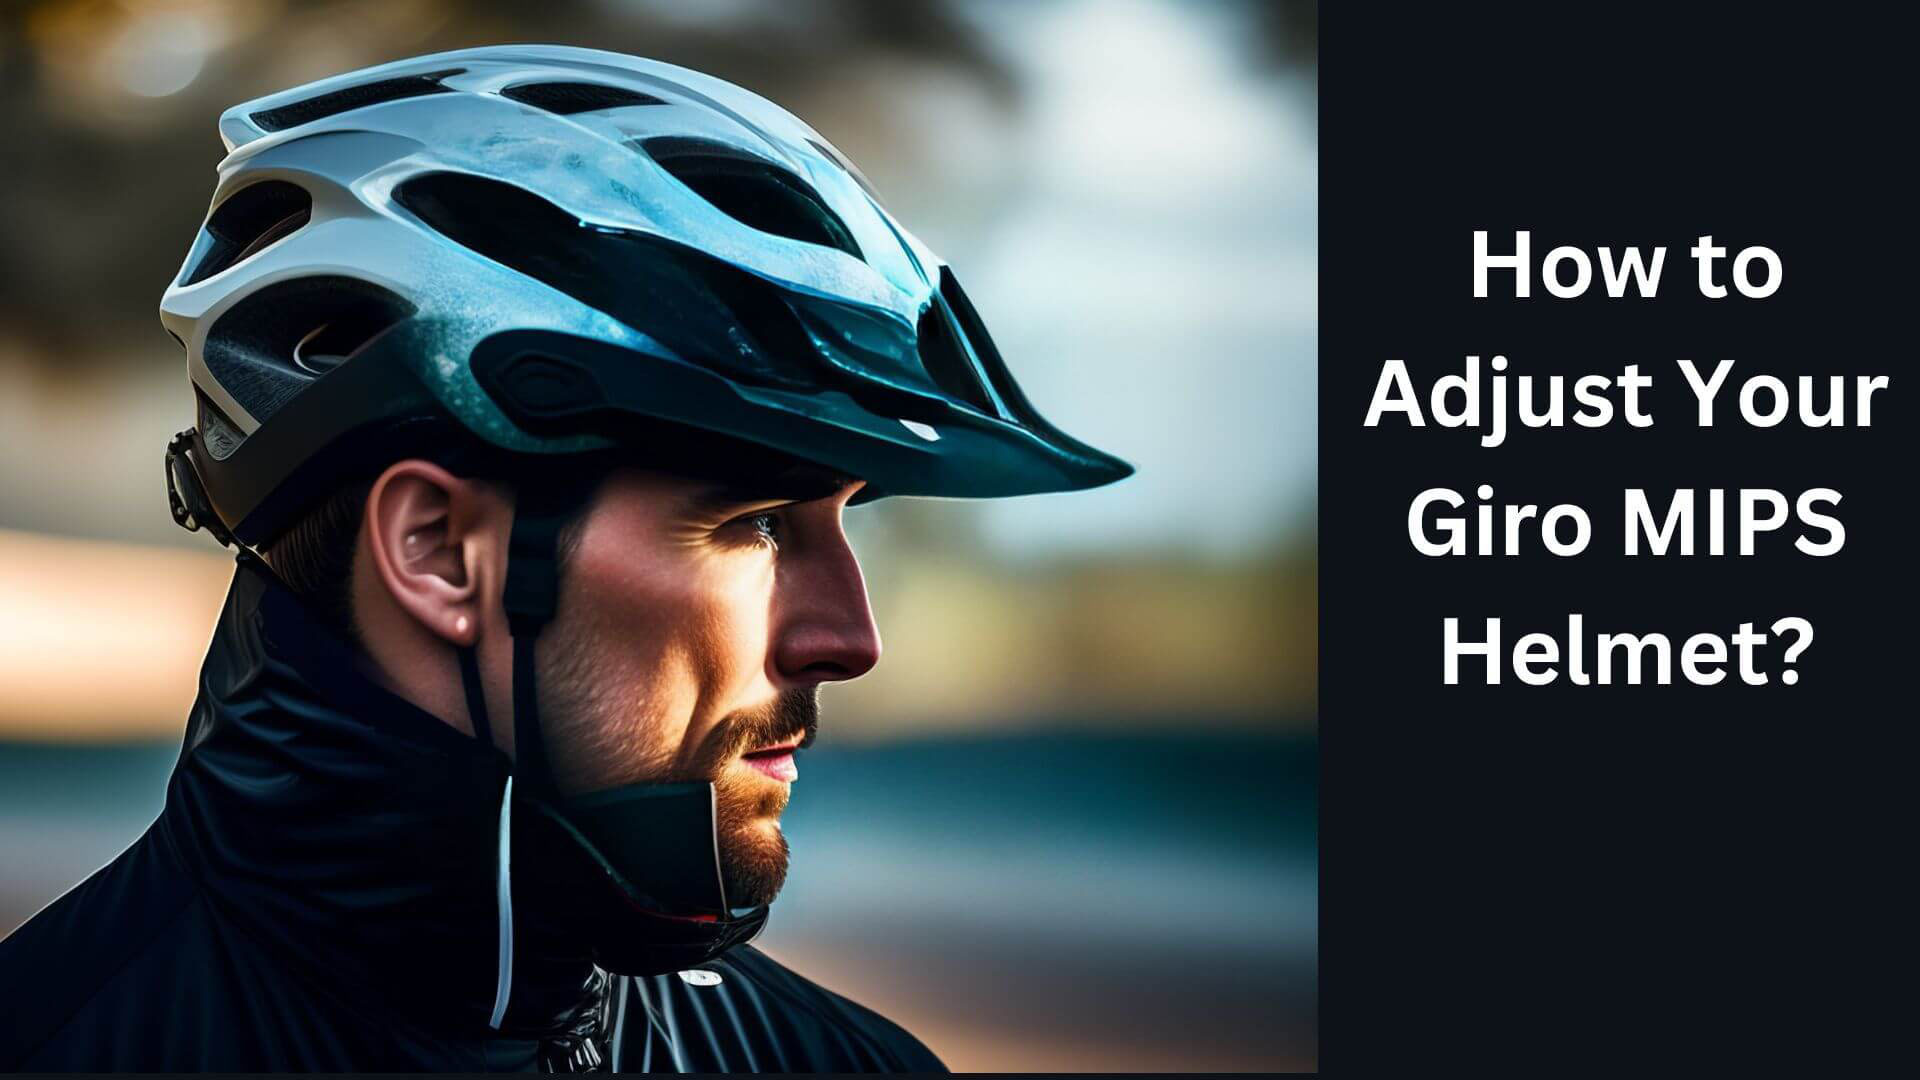 How to Adjust Your Giro MIPS Helmet? Step-By-Step Explained.